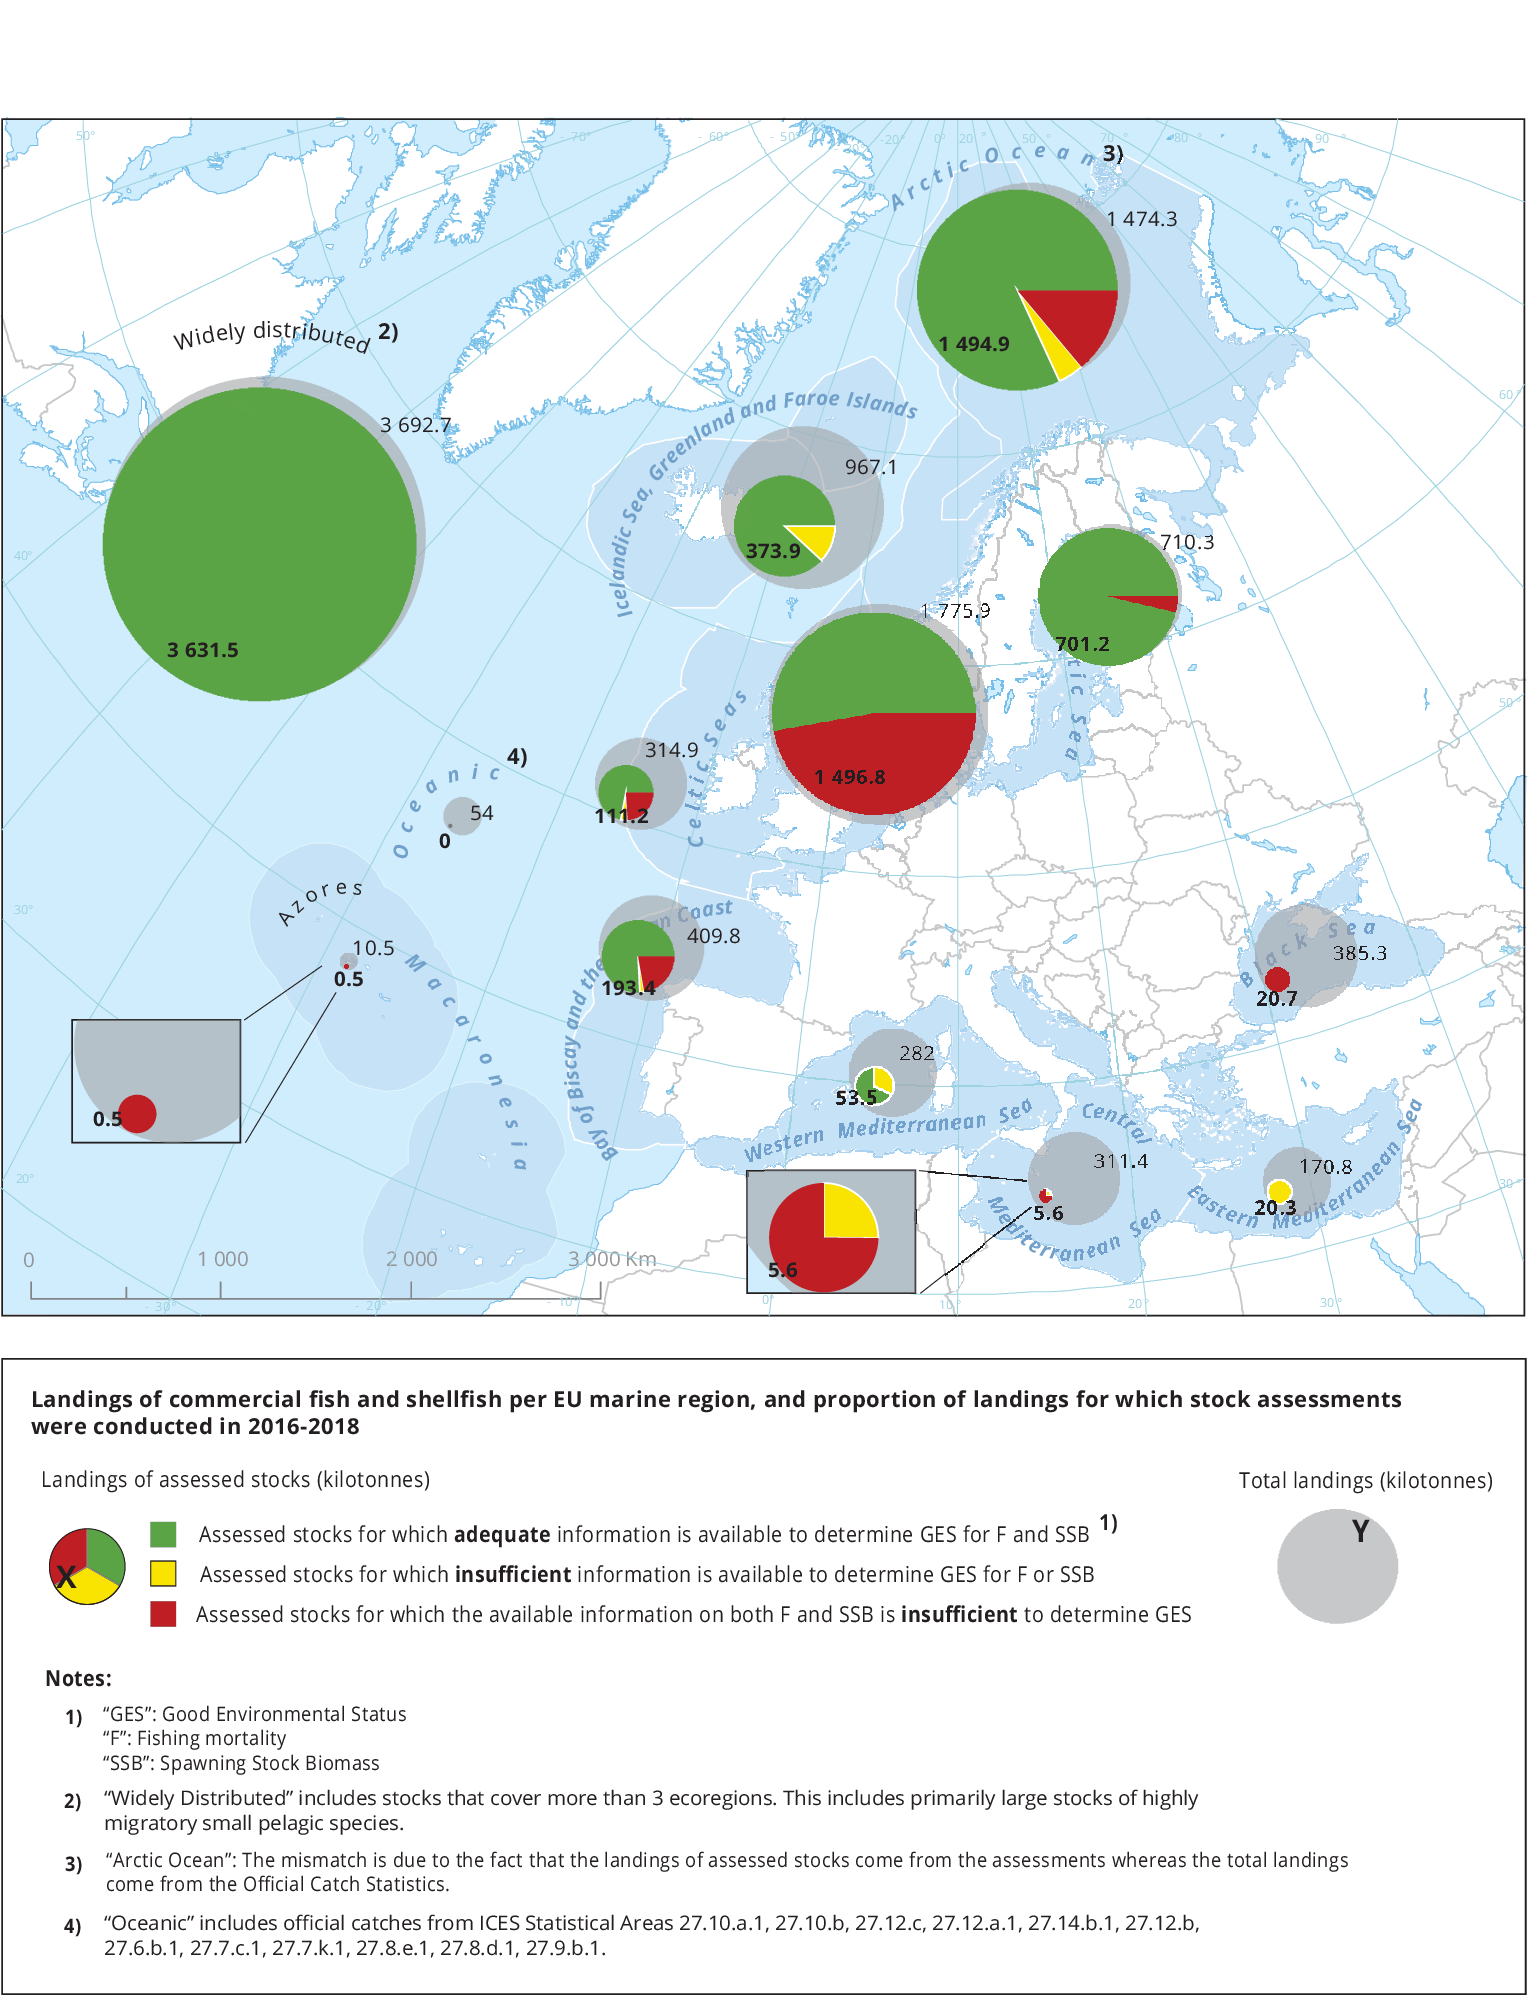 Landings of commercial fish and shellfish per EU marine region, and proportion of landings for which stock assessments were conducted in 2016-2018